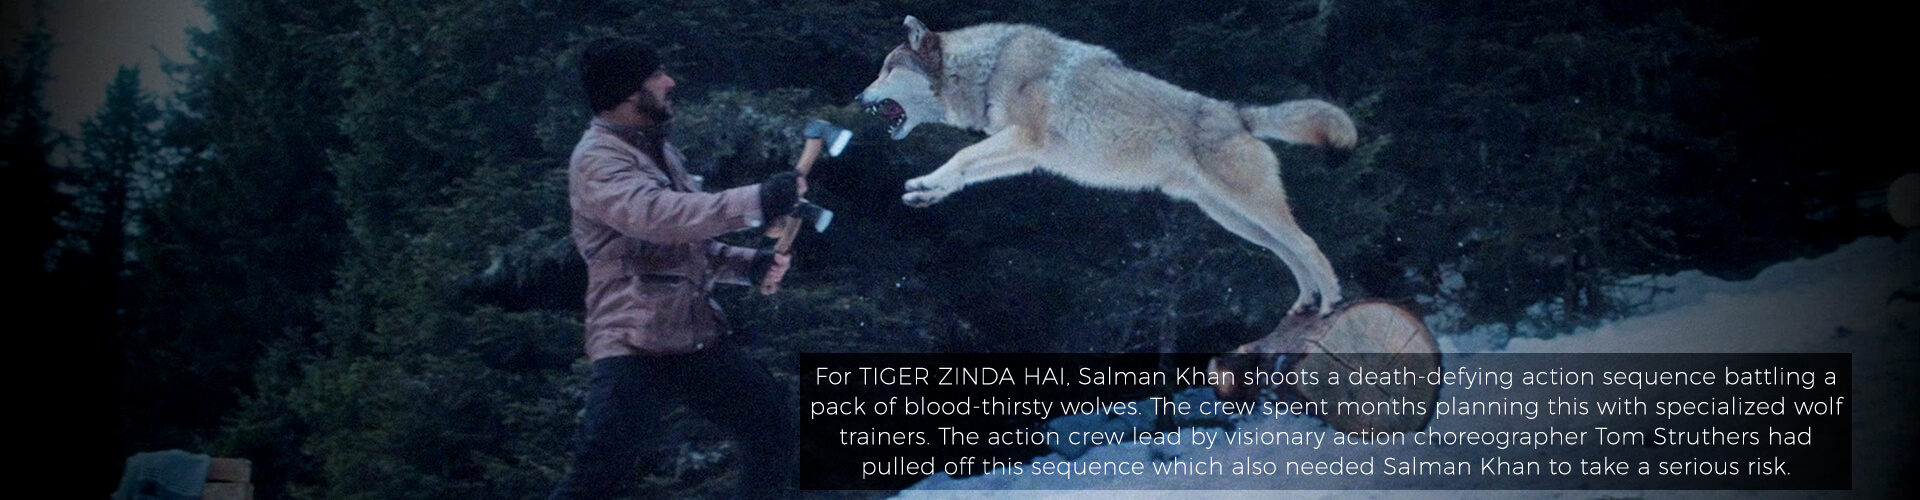 Salman Khan shoots a death-defying action sequence battling a pack of blood-thirsty wolves